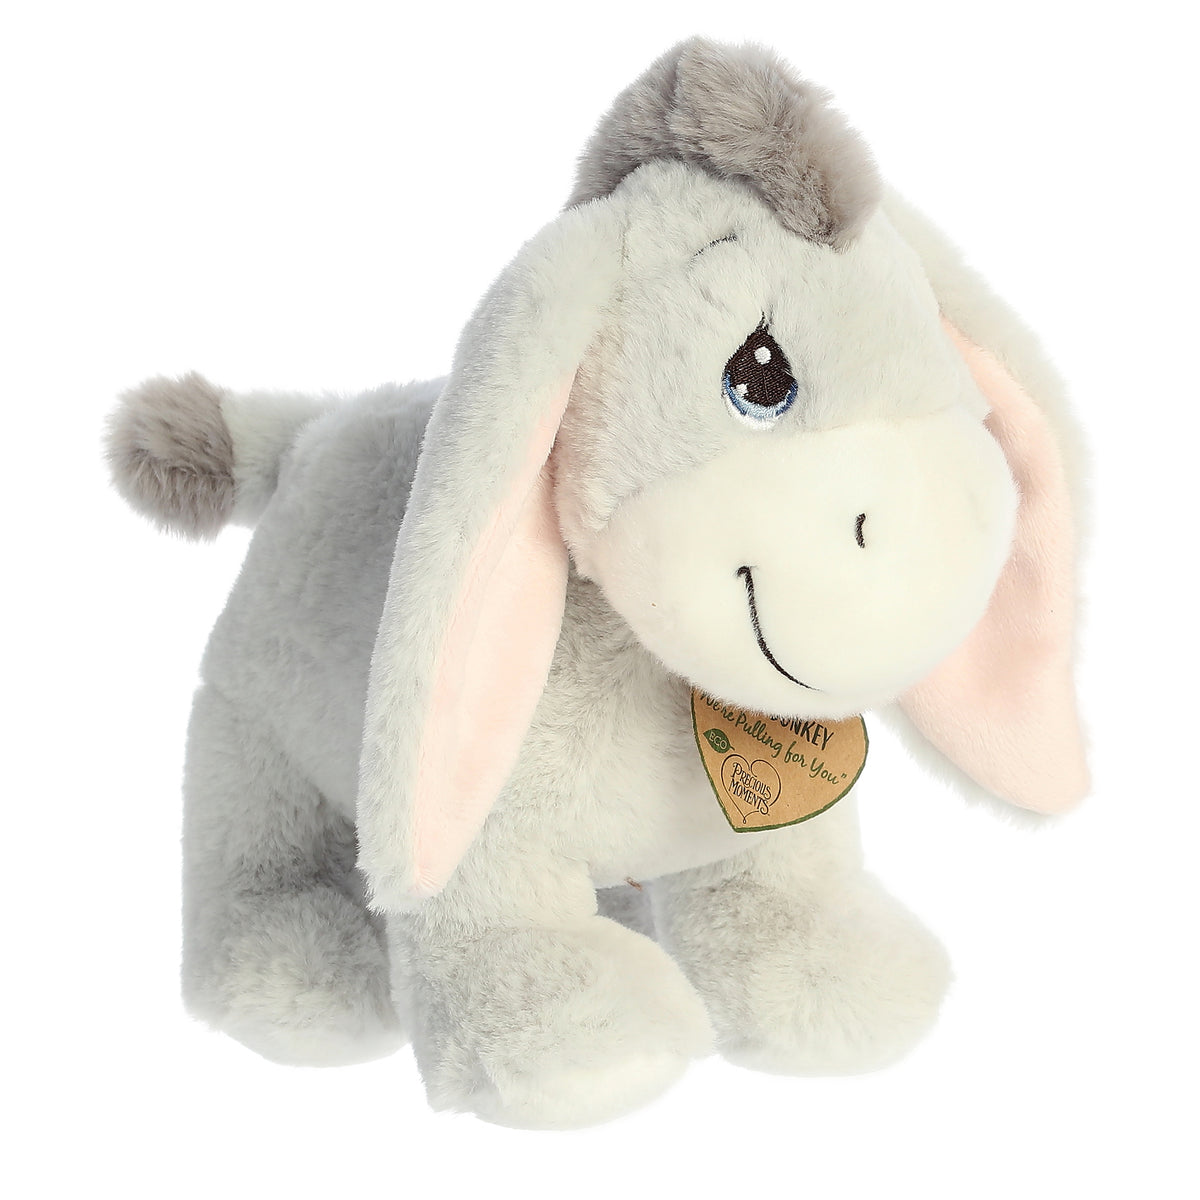 An eco-friendly donkey plush with tear-drop eyes, long floppy ears, and a precious moments inspirational tag around its neck.